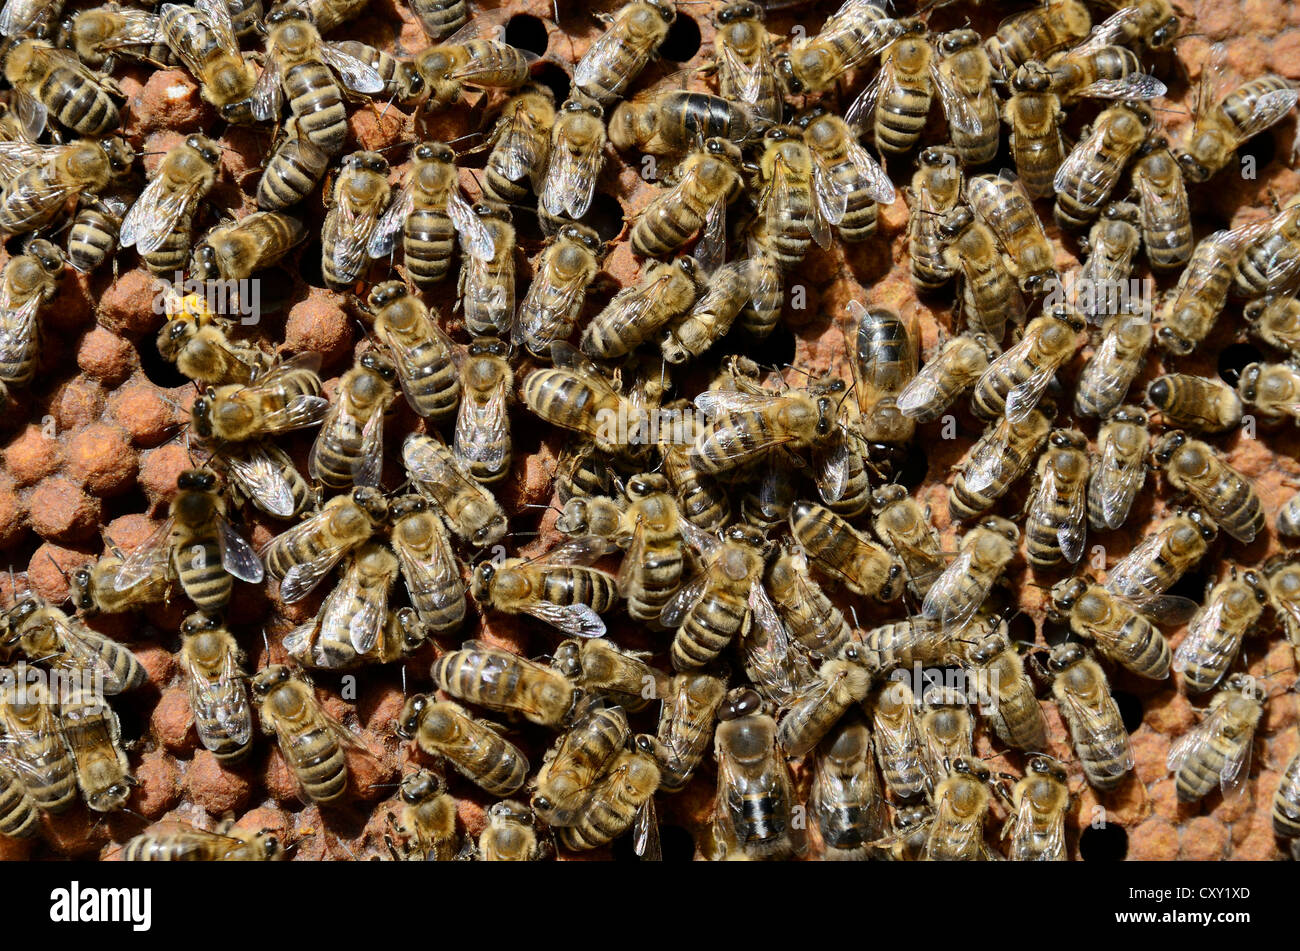 Brood comb with drone brood surrounded by worker bees (Apis mellifera var. carnica) Stock Photo